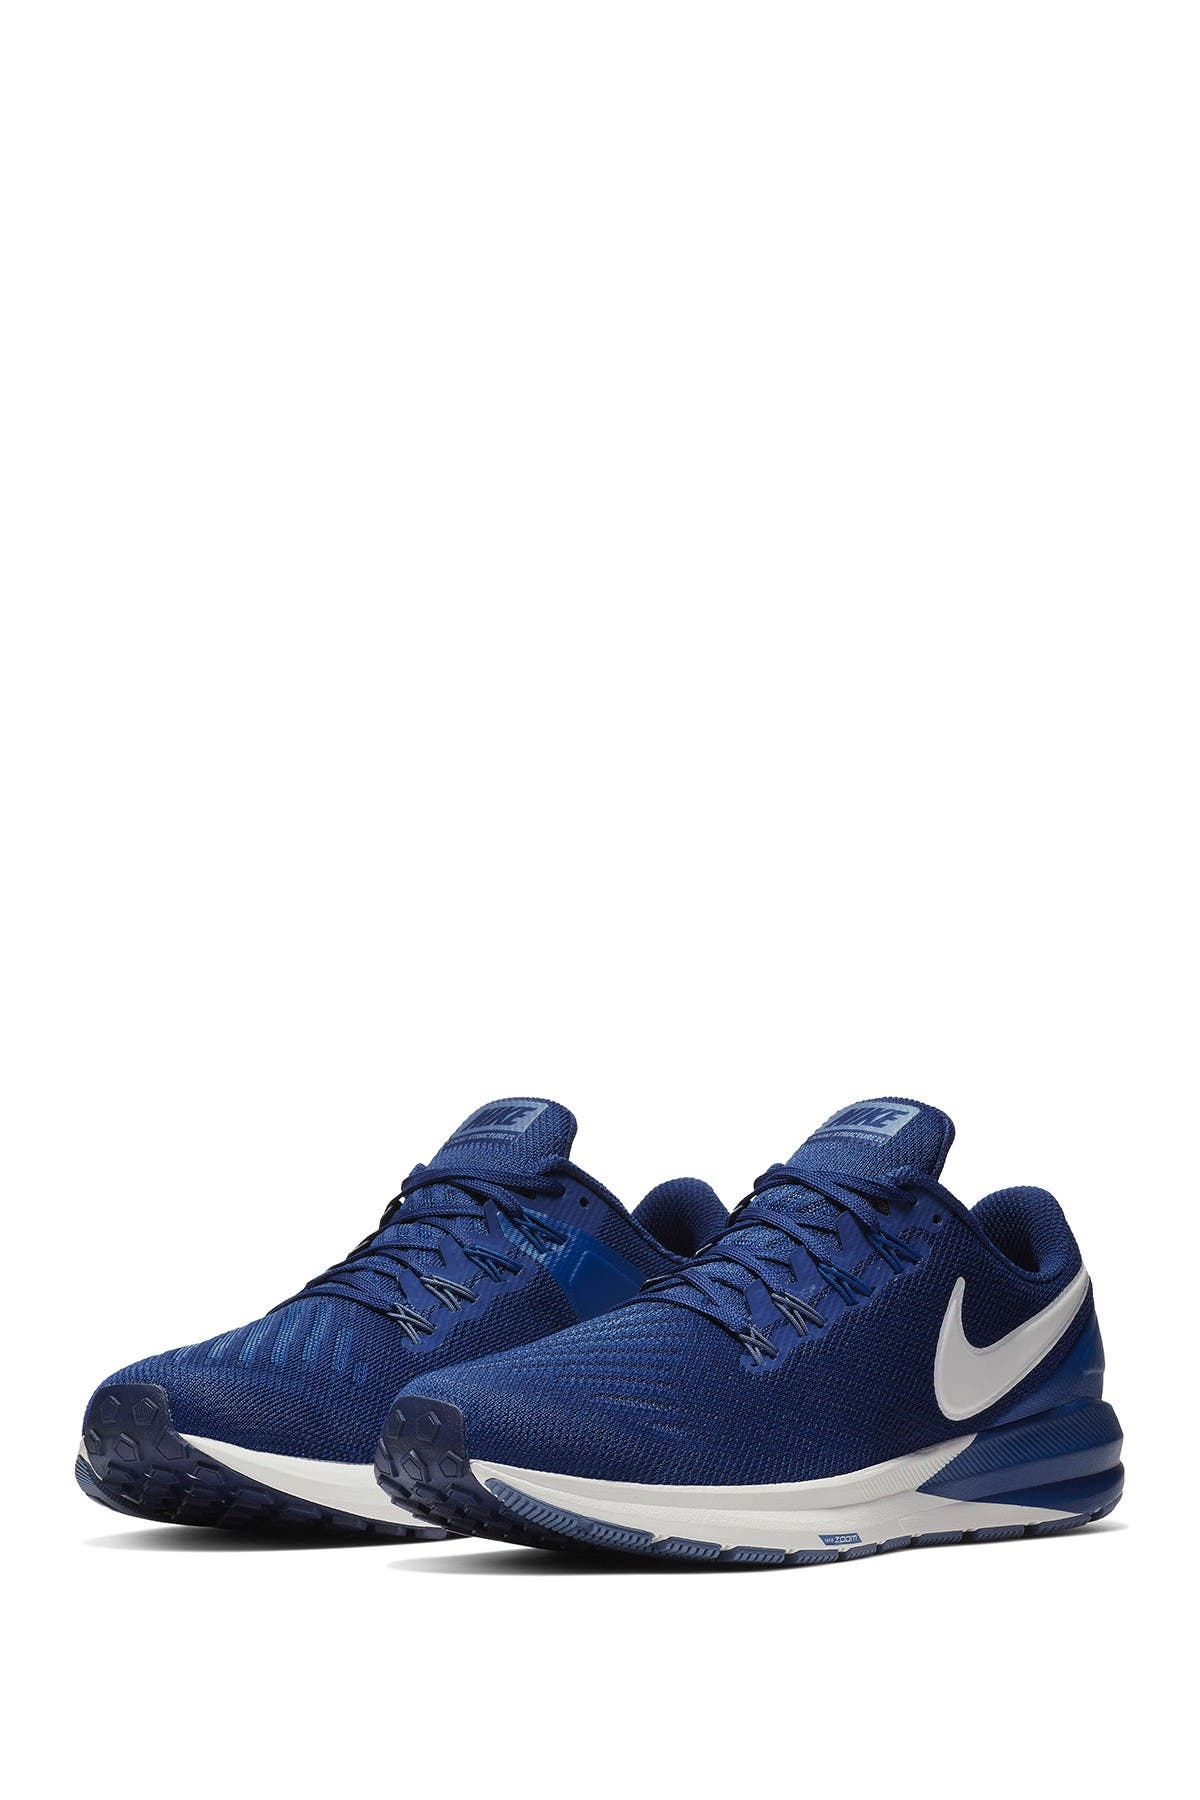 nike zoom structure 22 wide